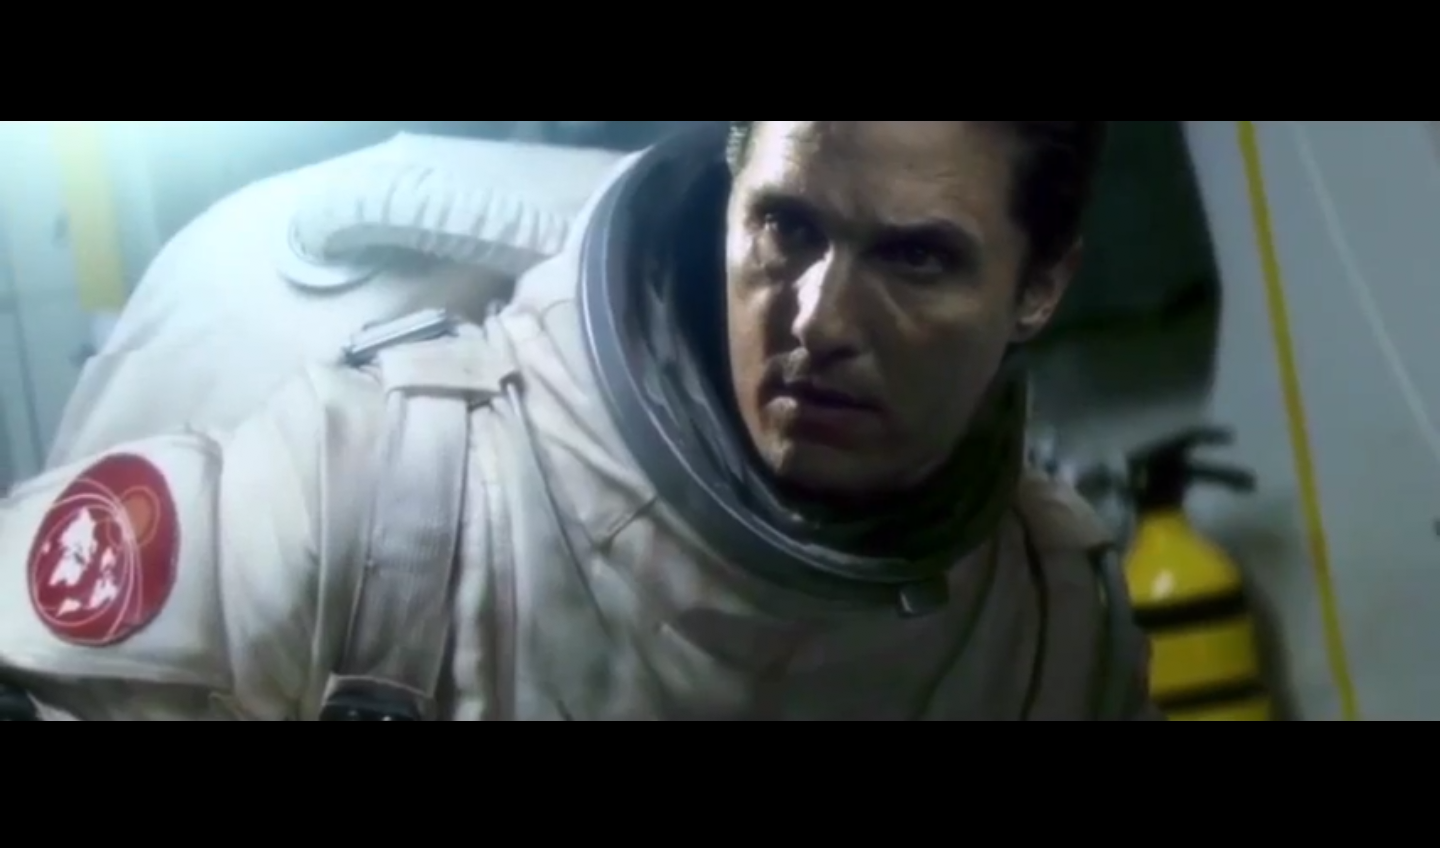 Christopher Nolan’s Interstellar: What Can We Expect?